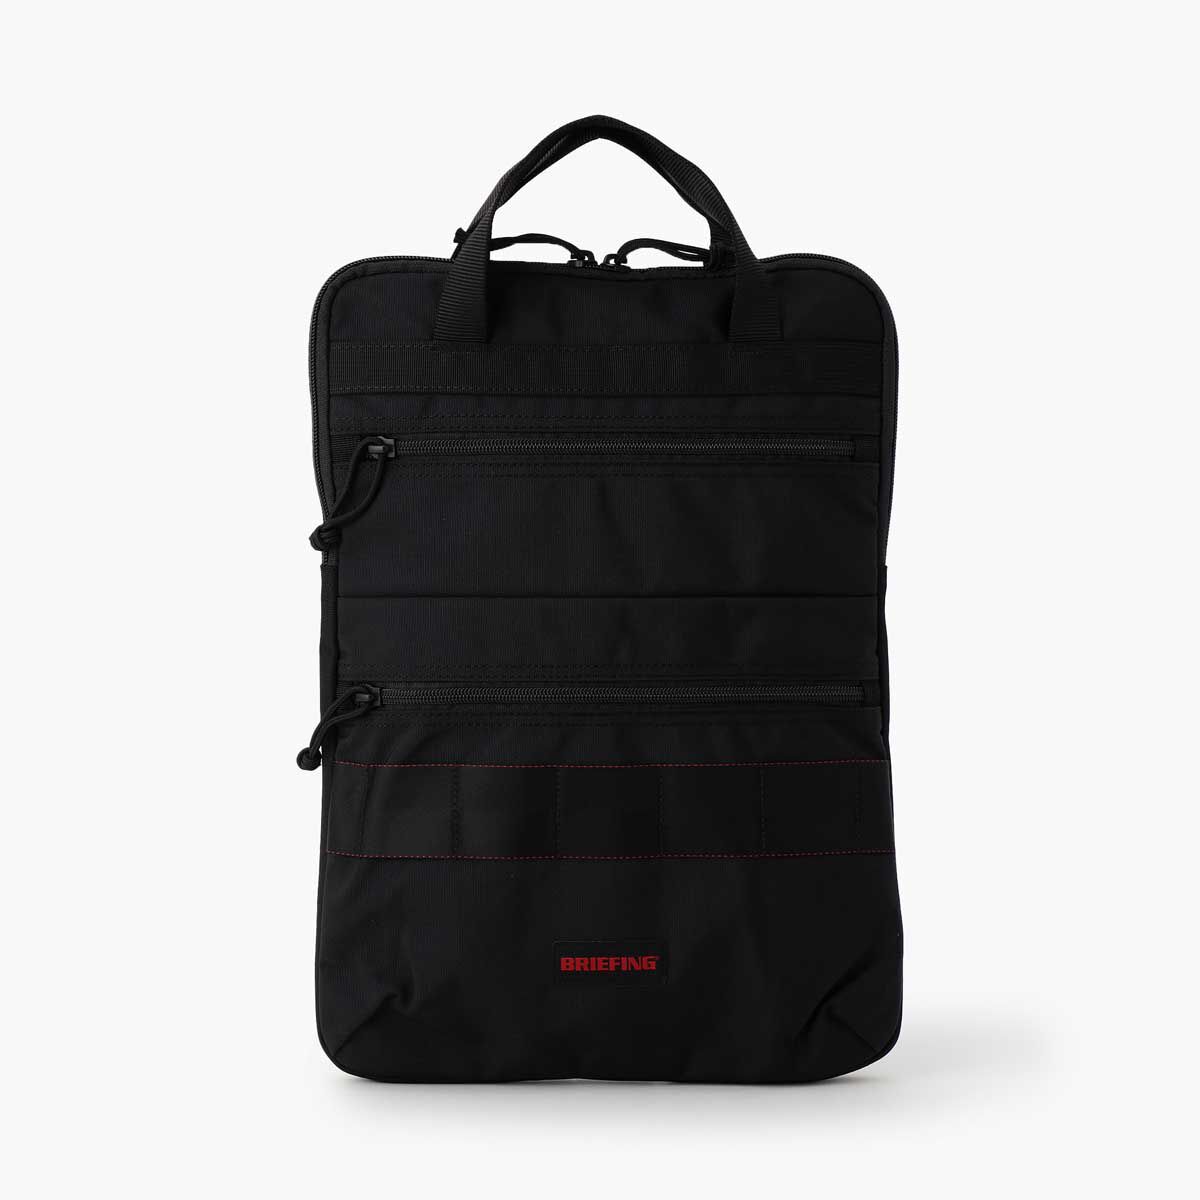 New Arrivals | BRIEFING | Premium Bags and Luggage